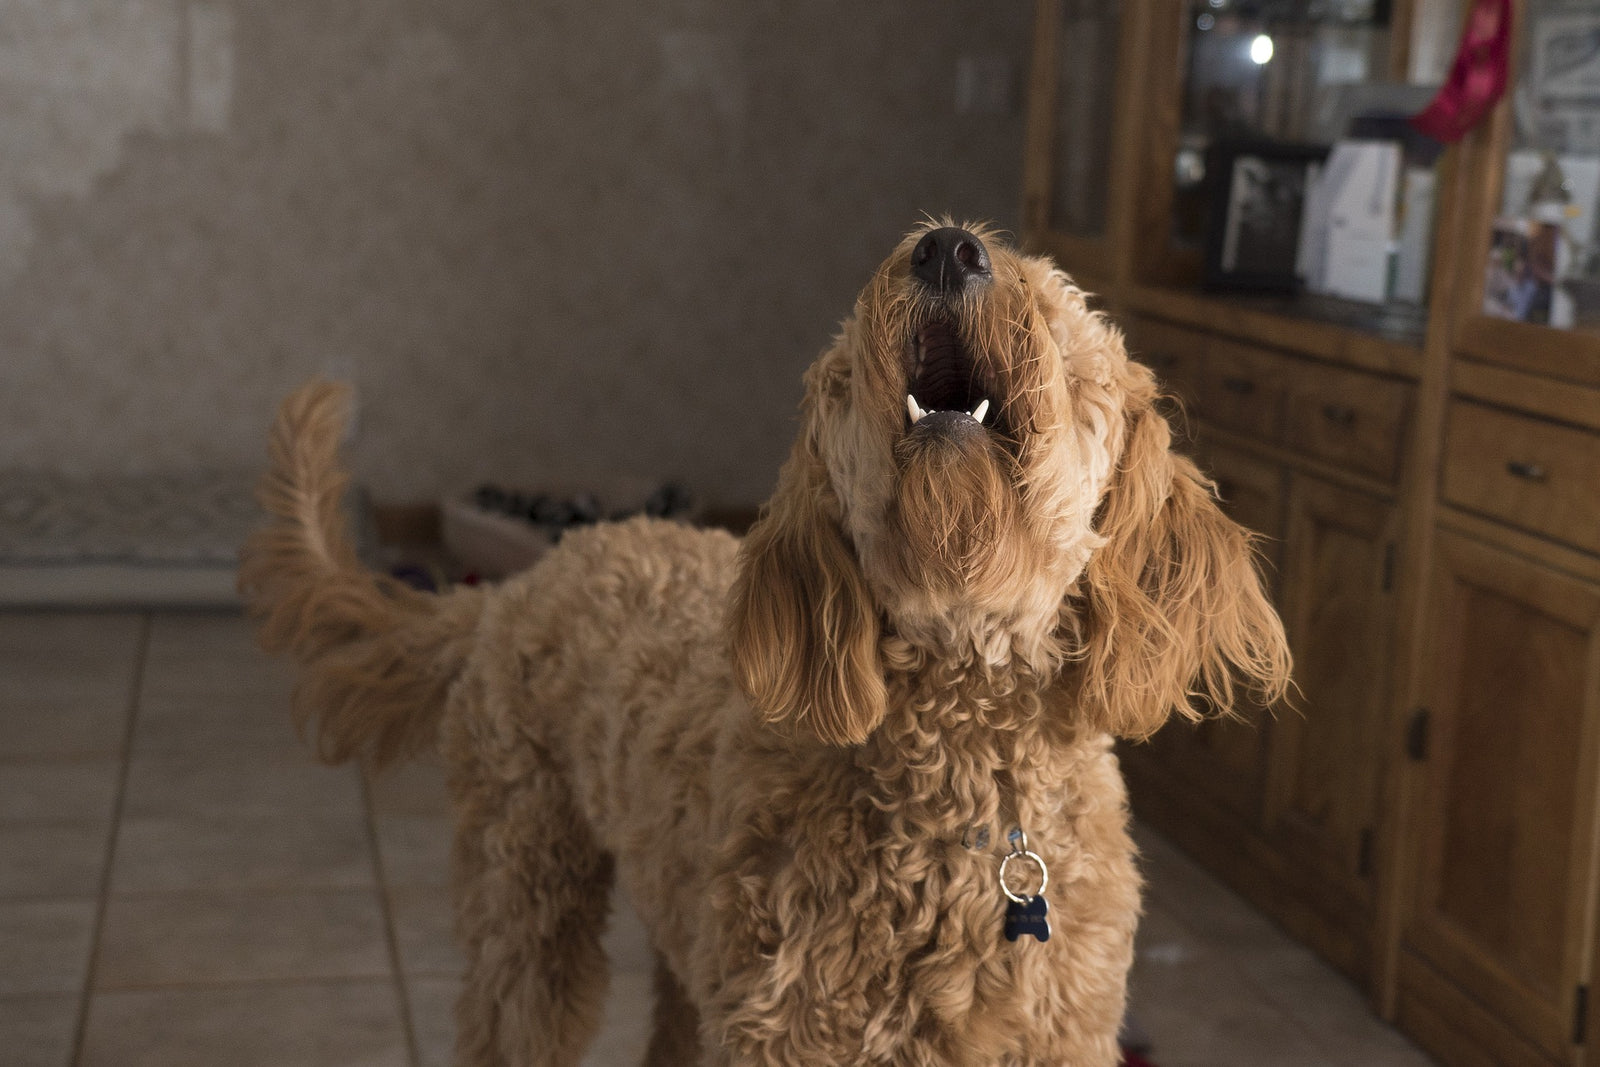 Excessive Barking: How to Train Your a Dog to Stop Barking